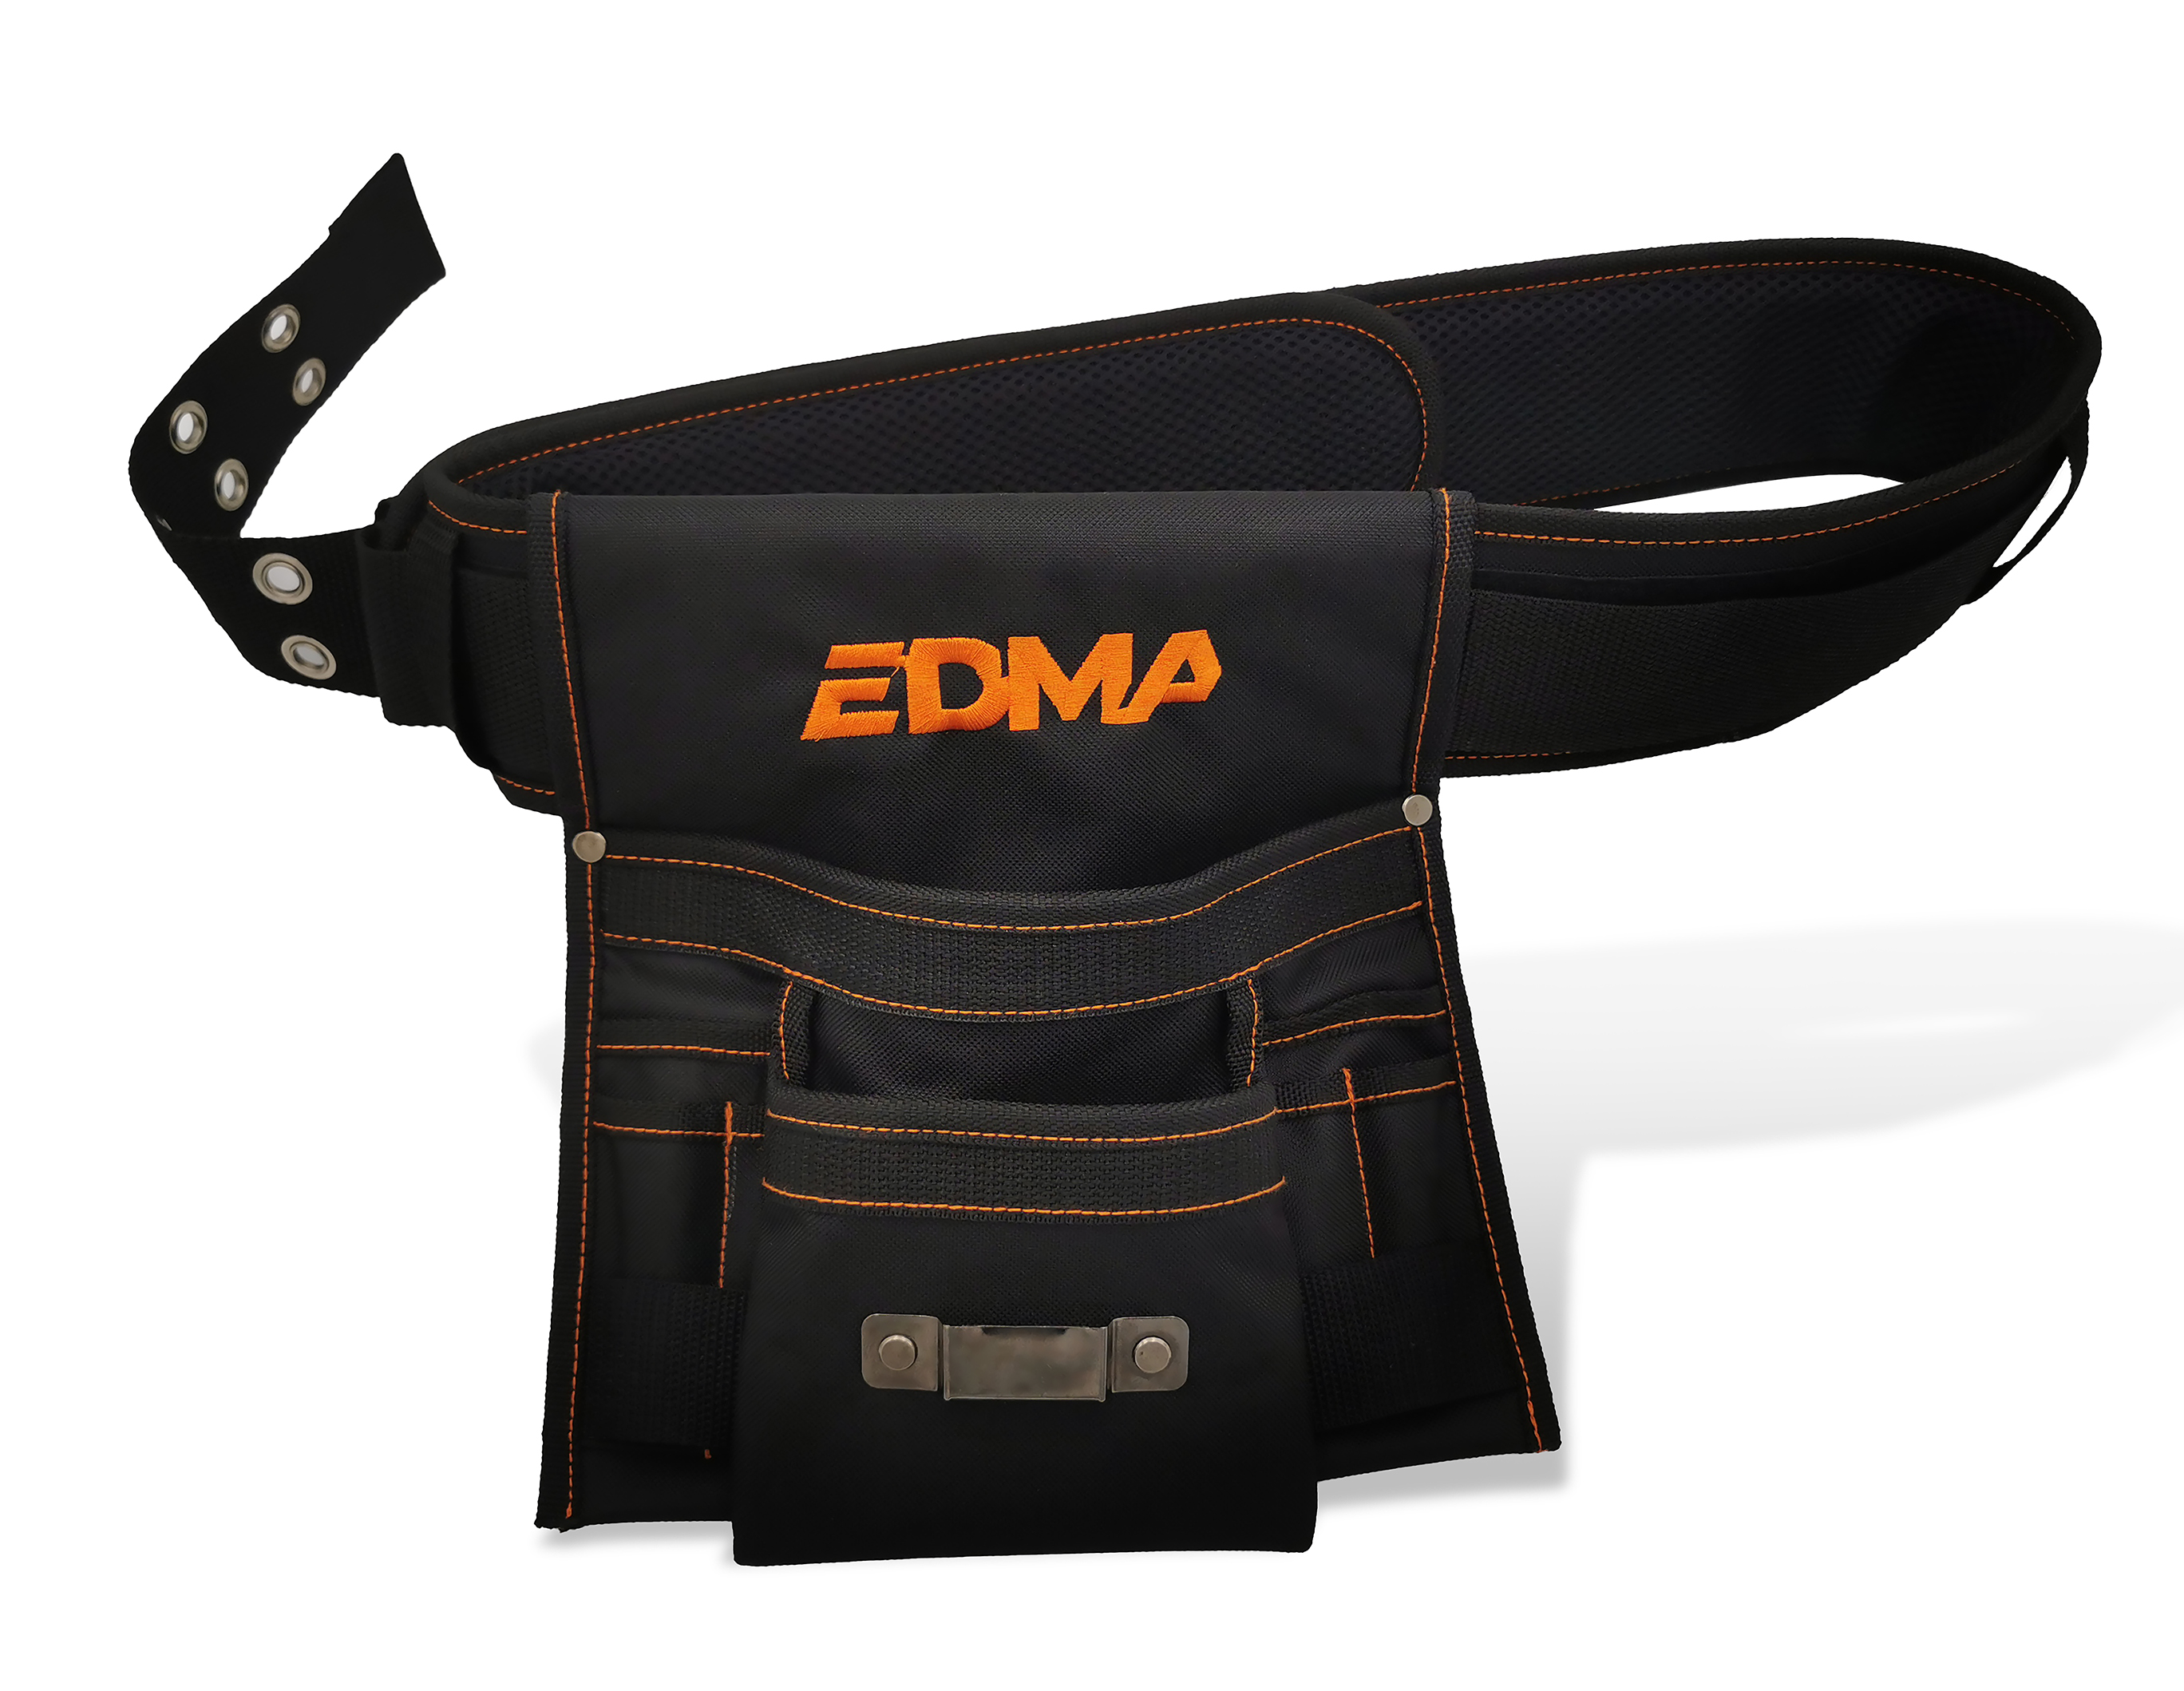 A new single pocket contractor rig in EDMA textile solutions range